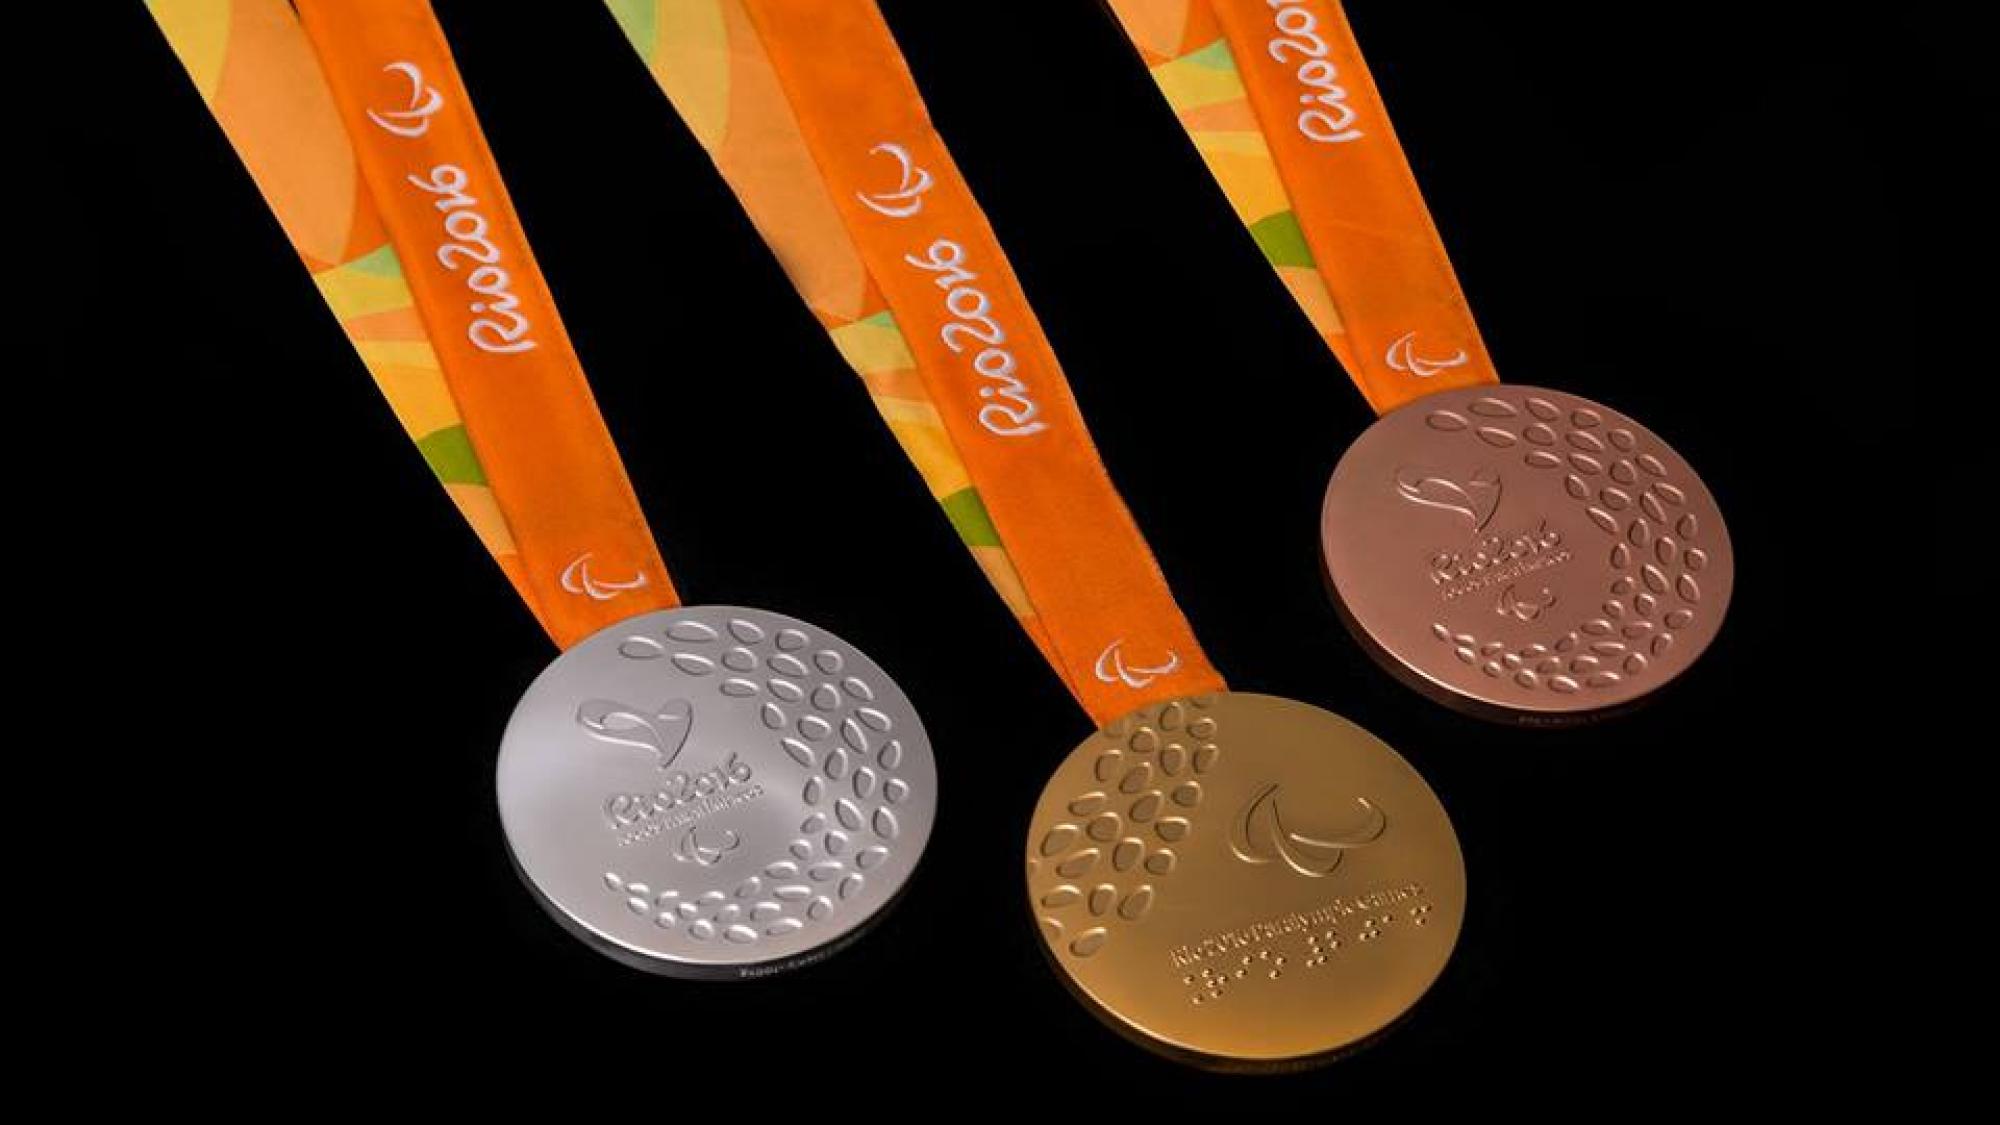 These are the medals athletes will compete for at the Rio 2016 Paralympic Games.